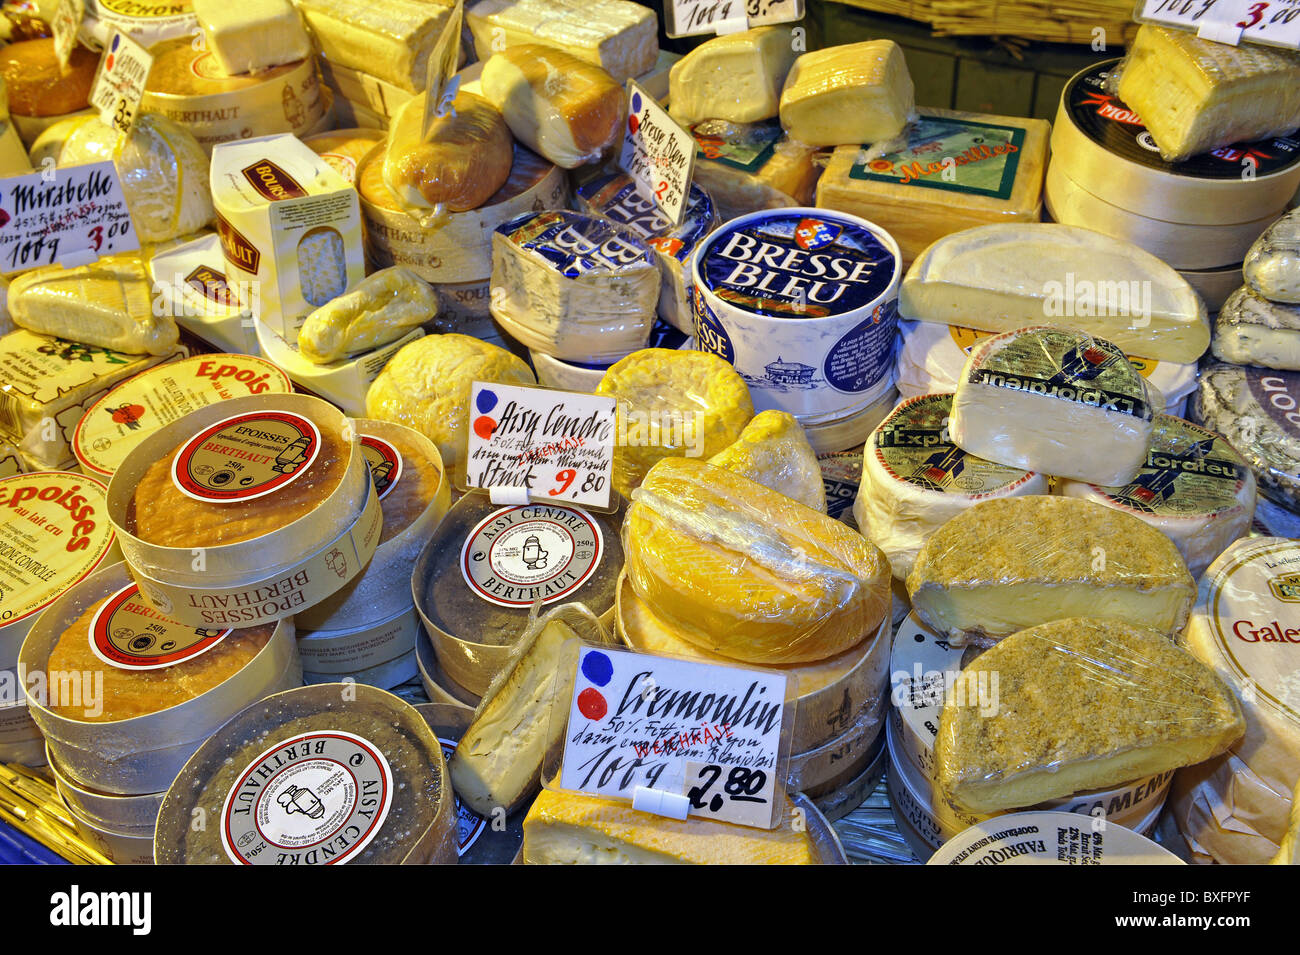 food, cheese, from France, Germany, 2009, Additional-Rights-Clearance-Info-Not-Available Stock Photo